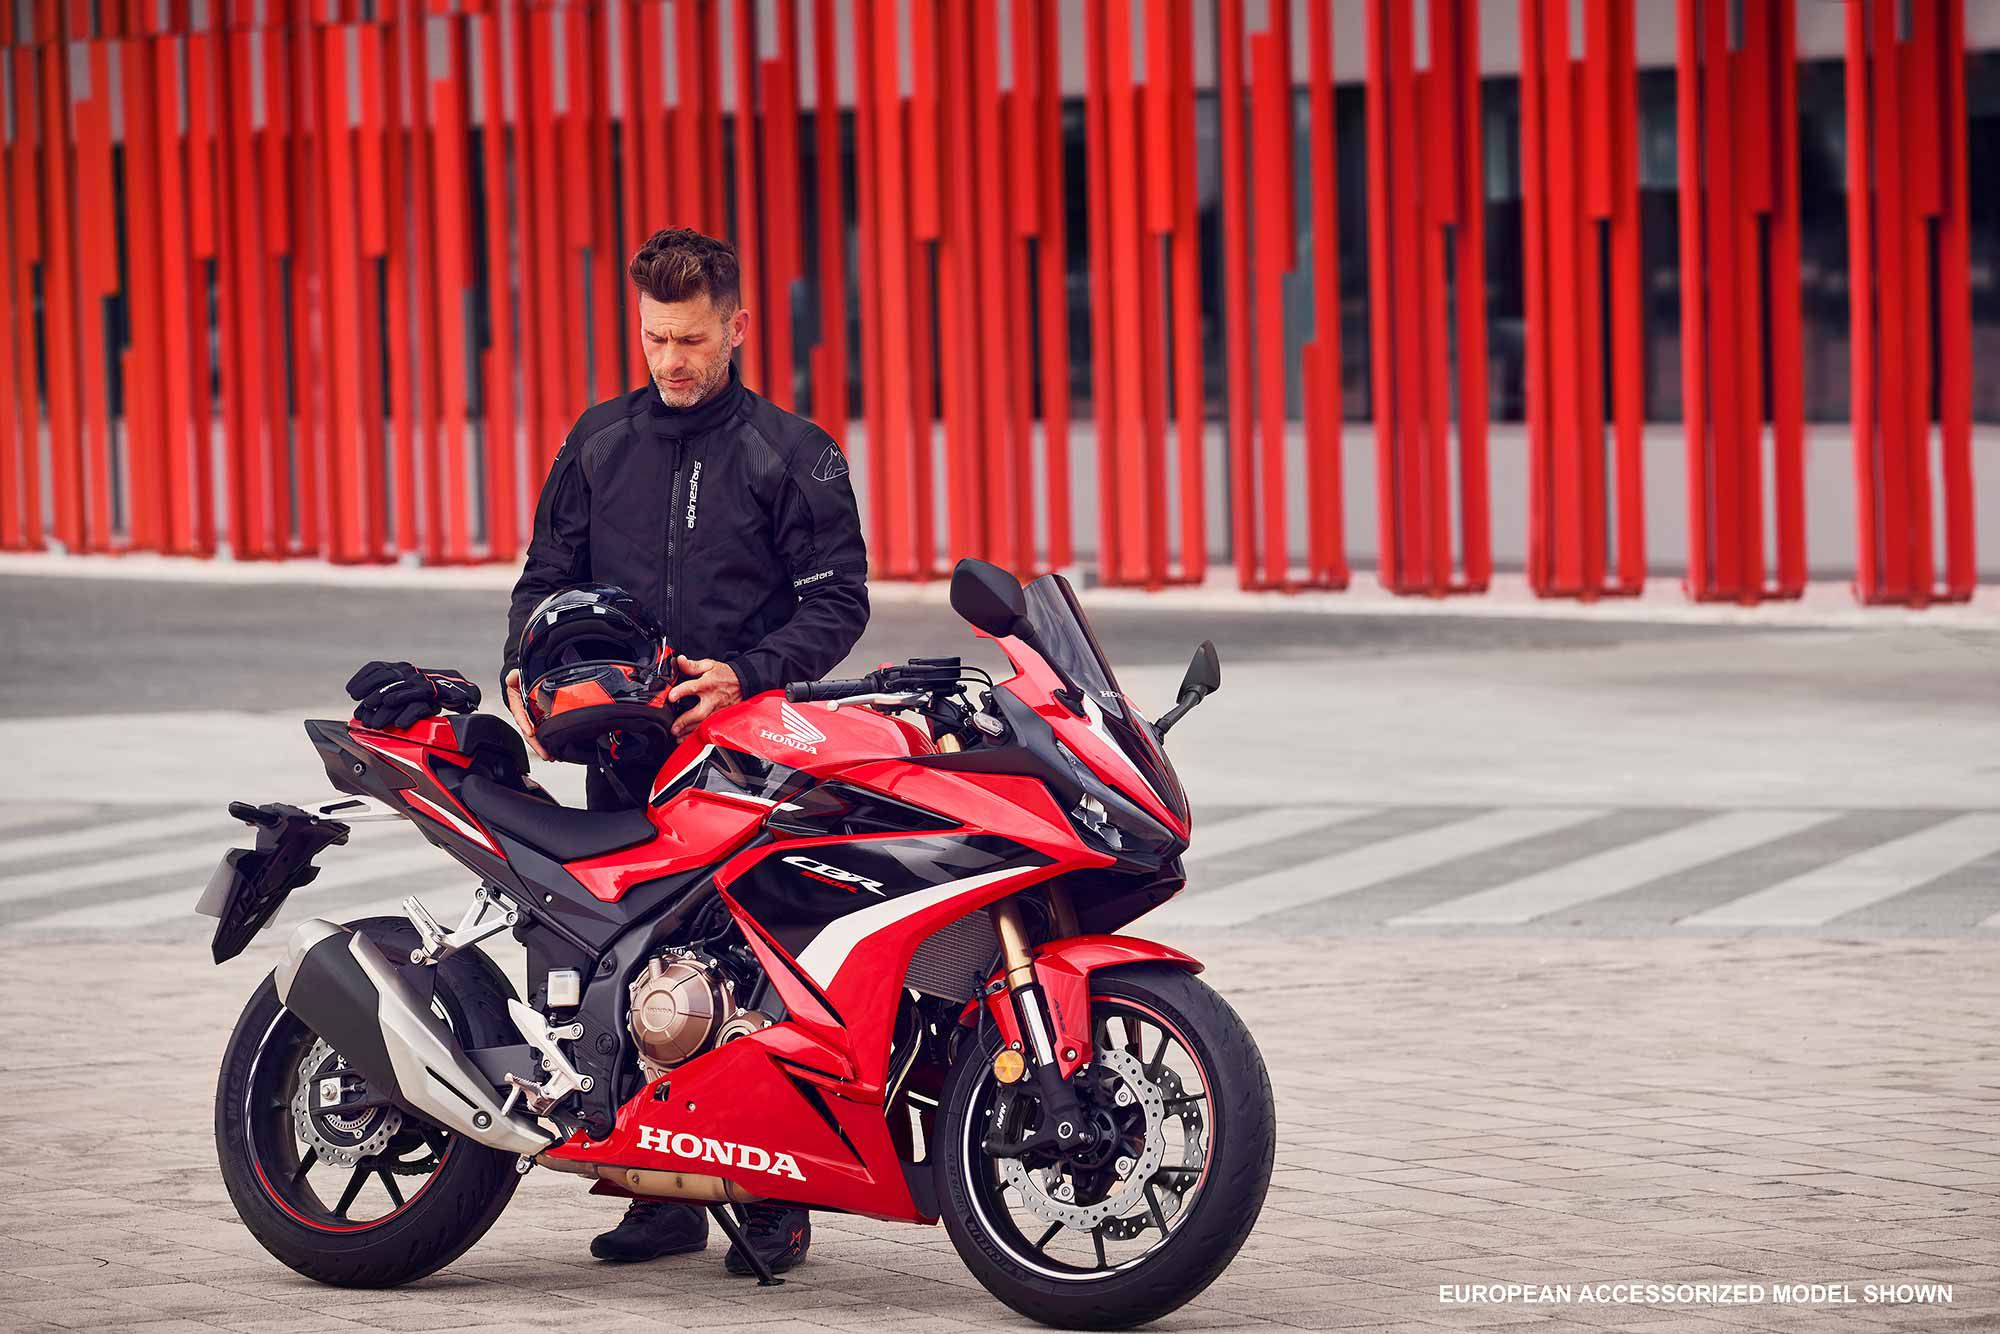 The 2022 Honda CBR500R returns with better suspension and braking components.